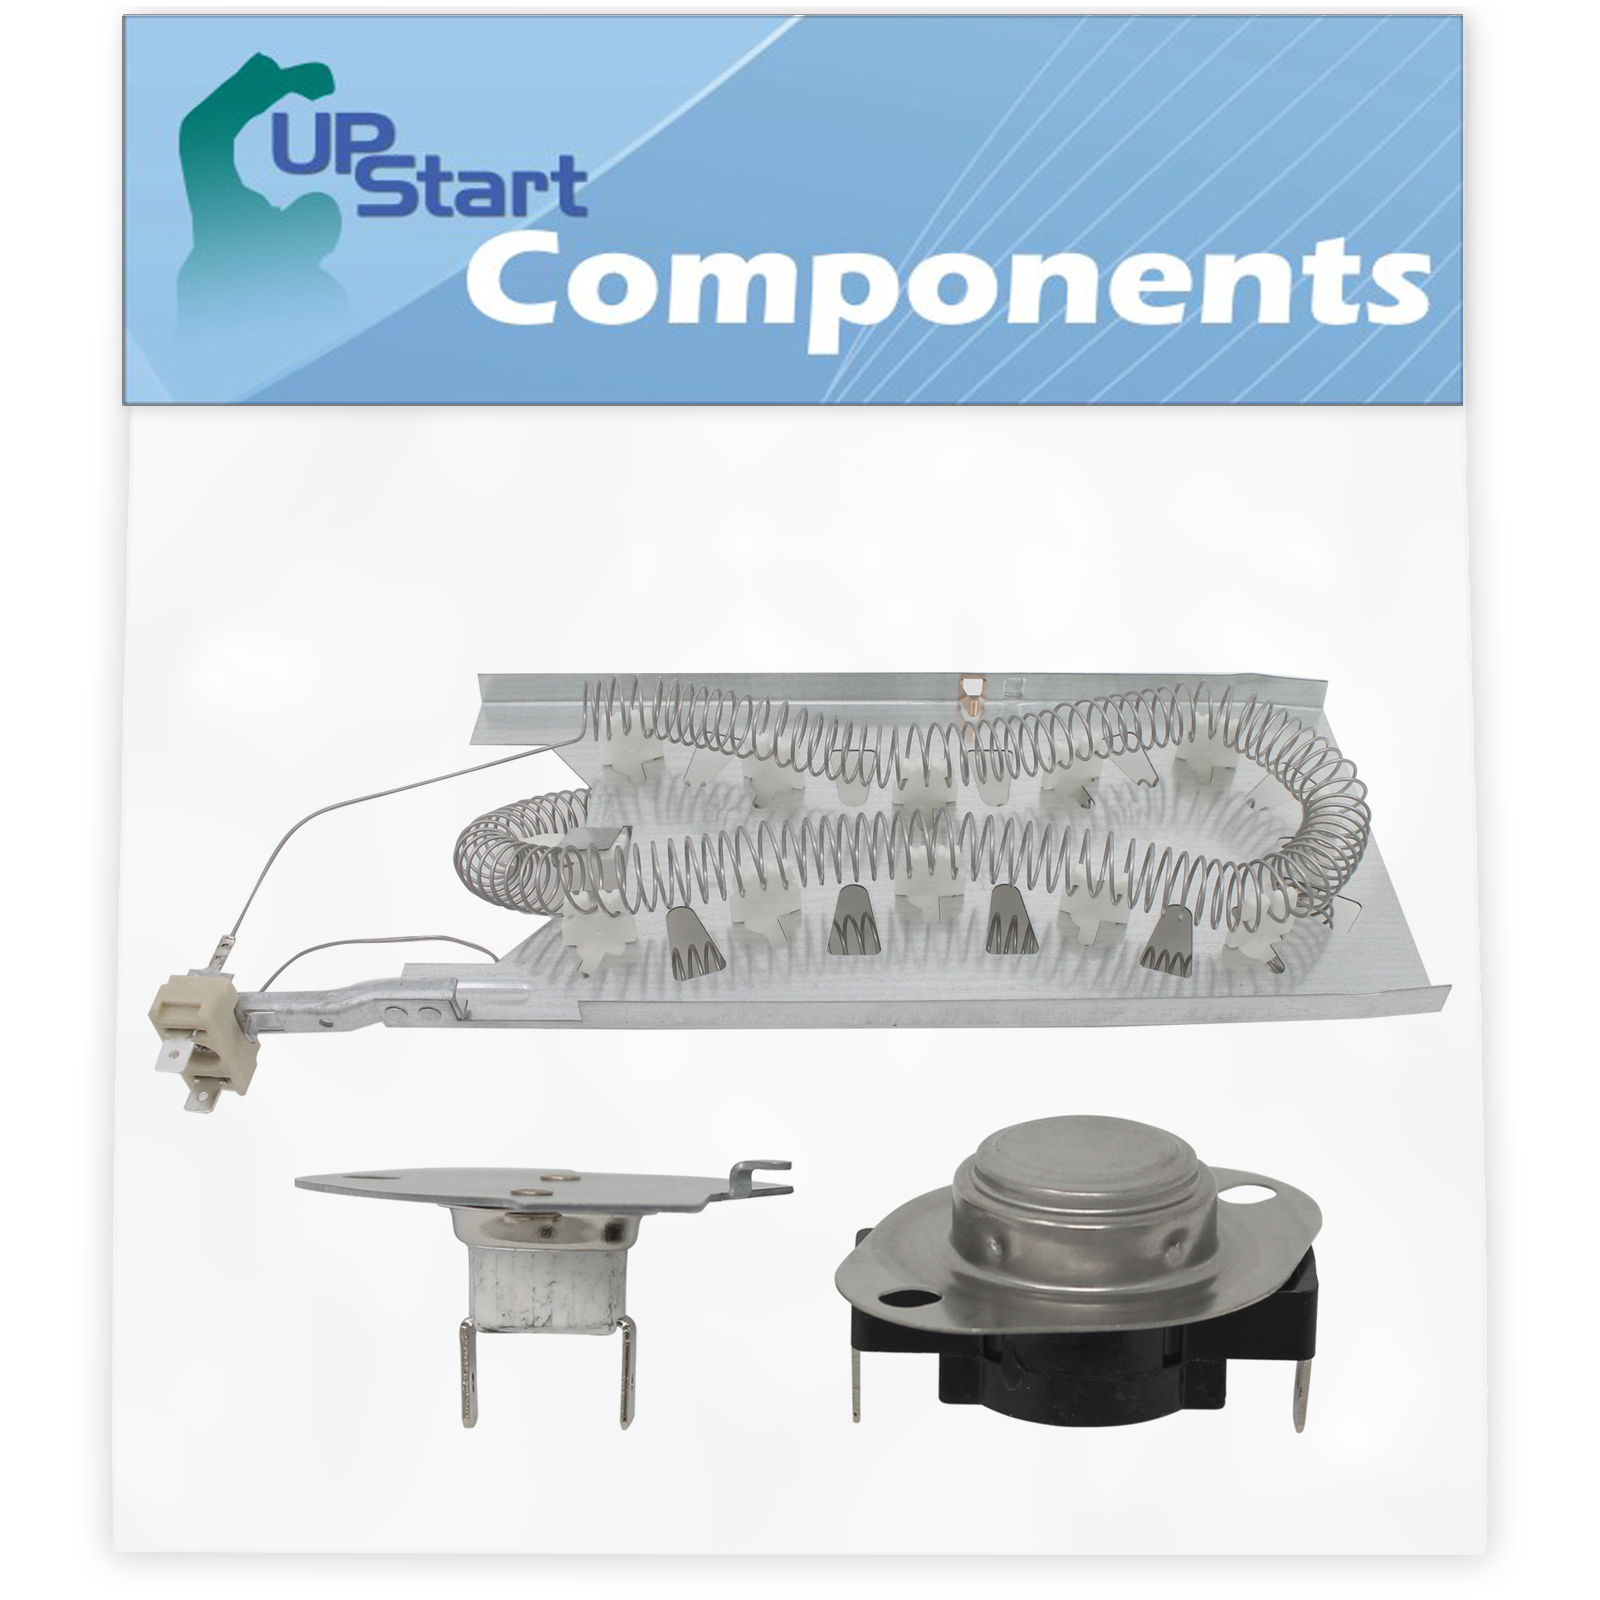 3387747 Dryer Heating Element & 279769 Thermal Cut-Off Kit Replacement for Kenmore / Sears 11096595420 Dryer - Compatible with WP3387747 & 279769 Heater Element & Thermal Fuse Kit - image 1 of 4